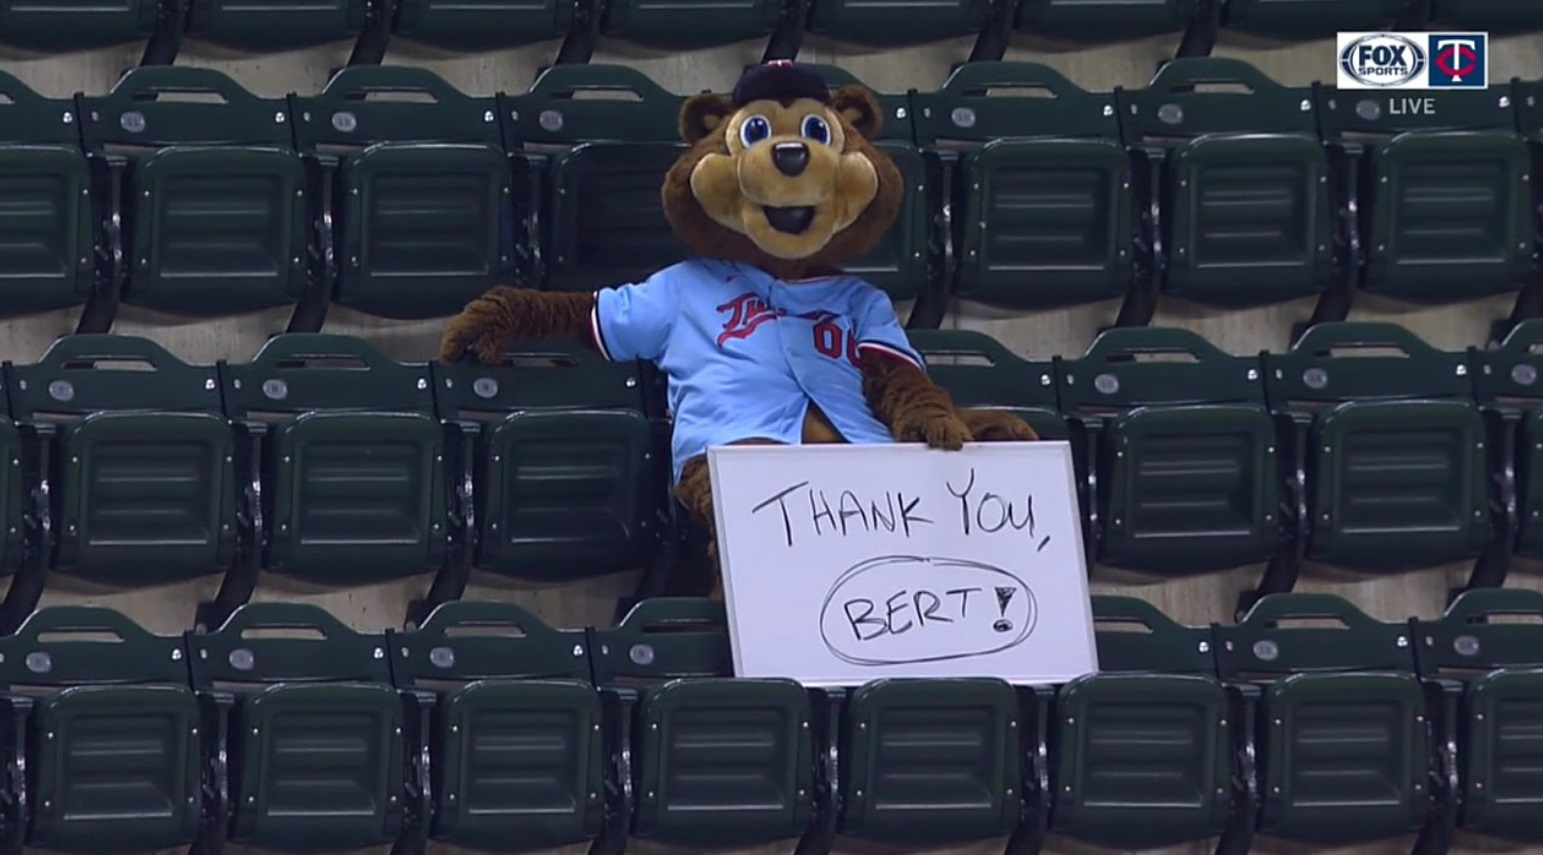 PHOTO Twins Mascot Sitting In Stands With Thank You Bert Sign